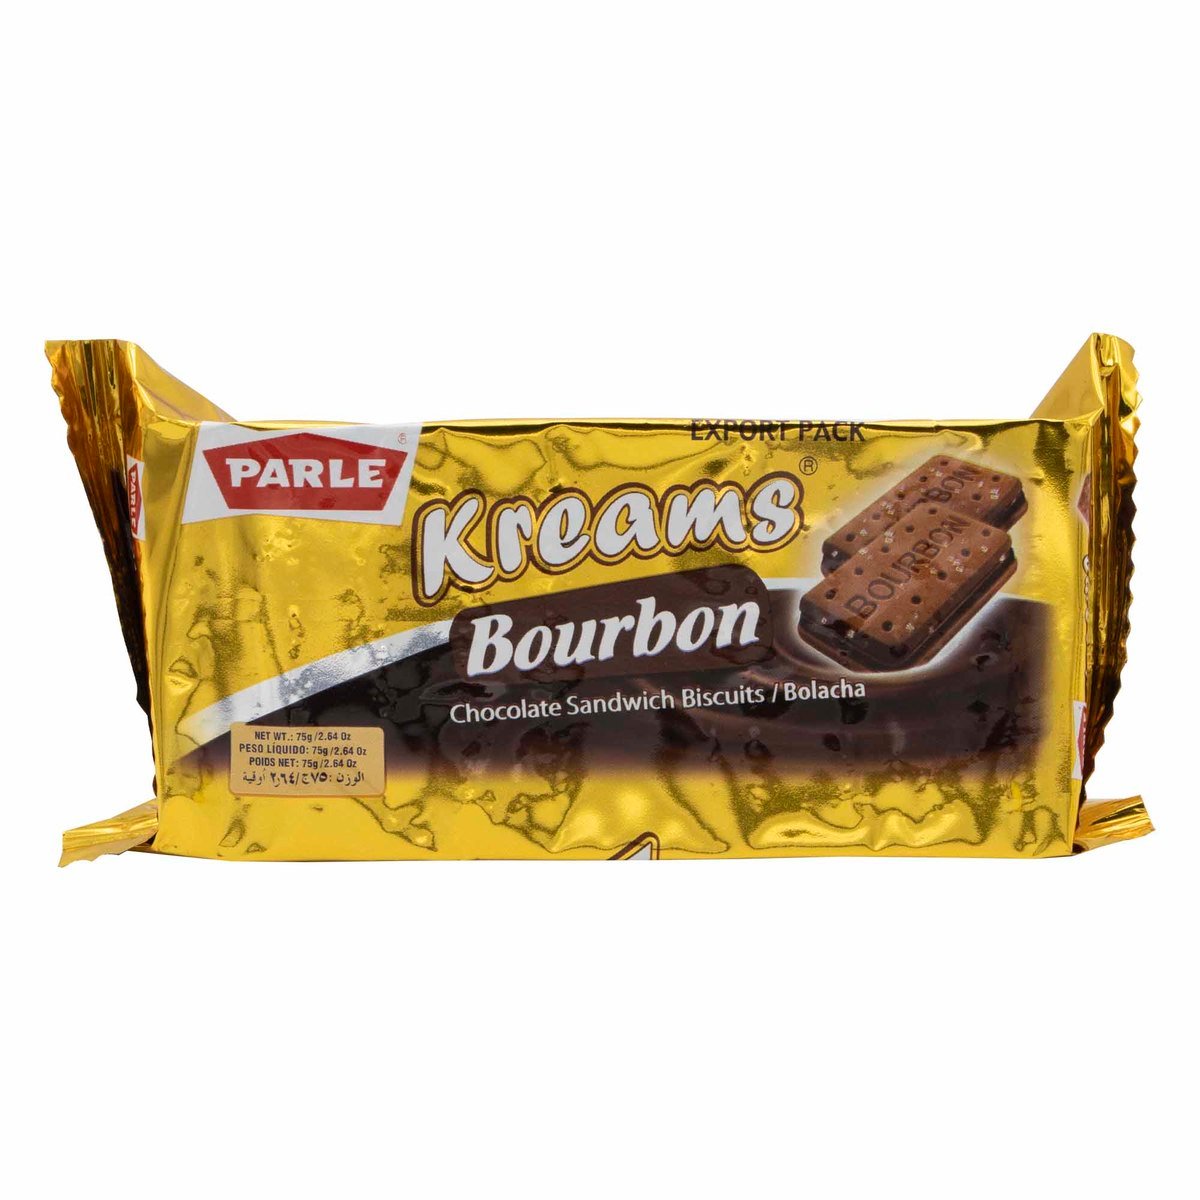 Parle Kreams Bourbon Chocolate Sandwich Biscuits 75 g